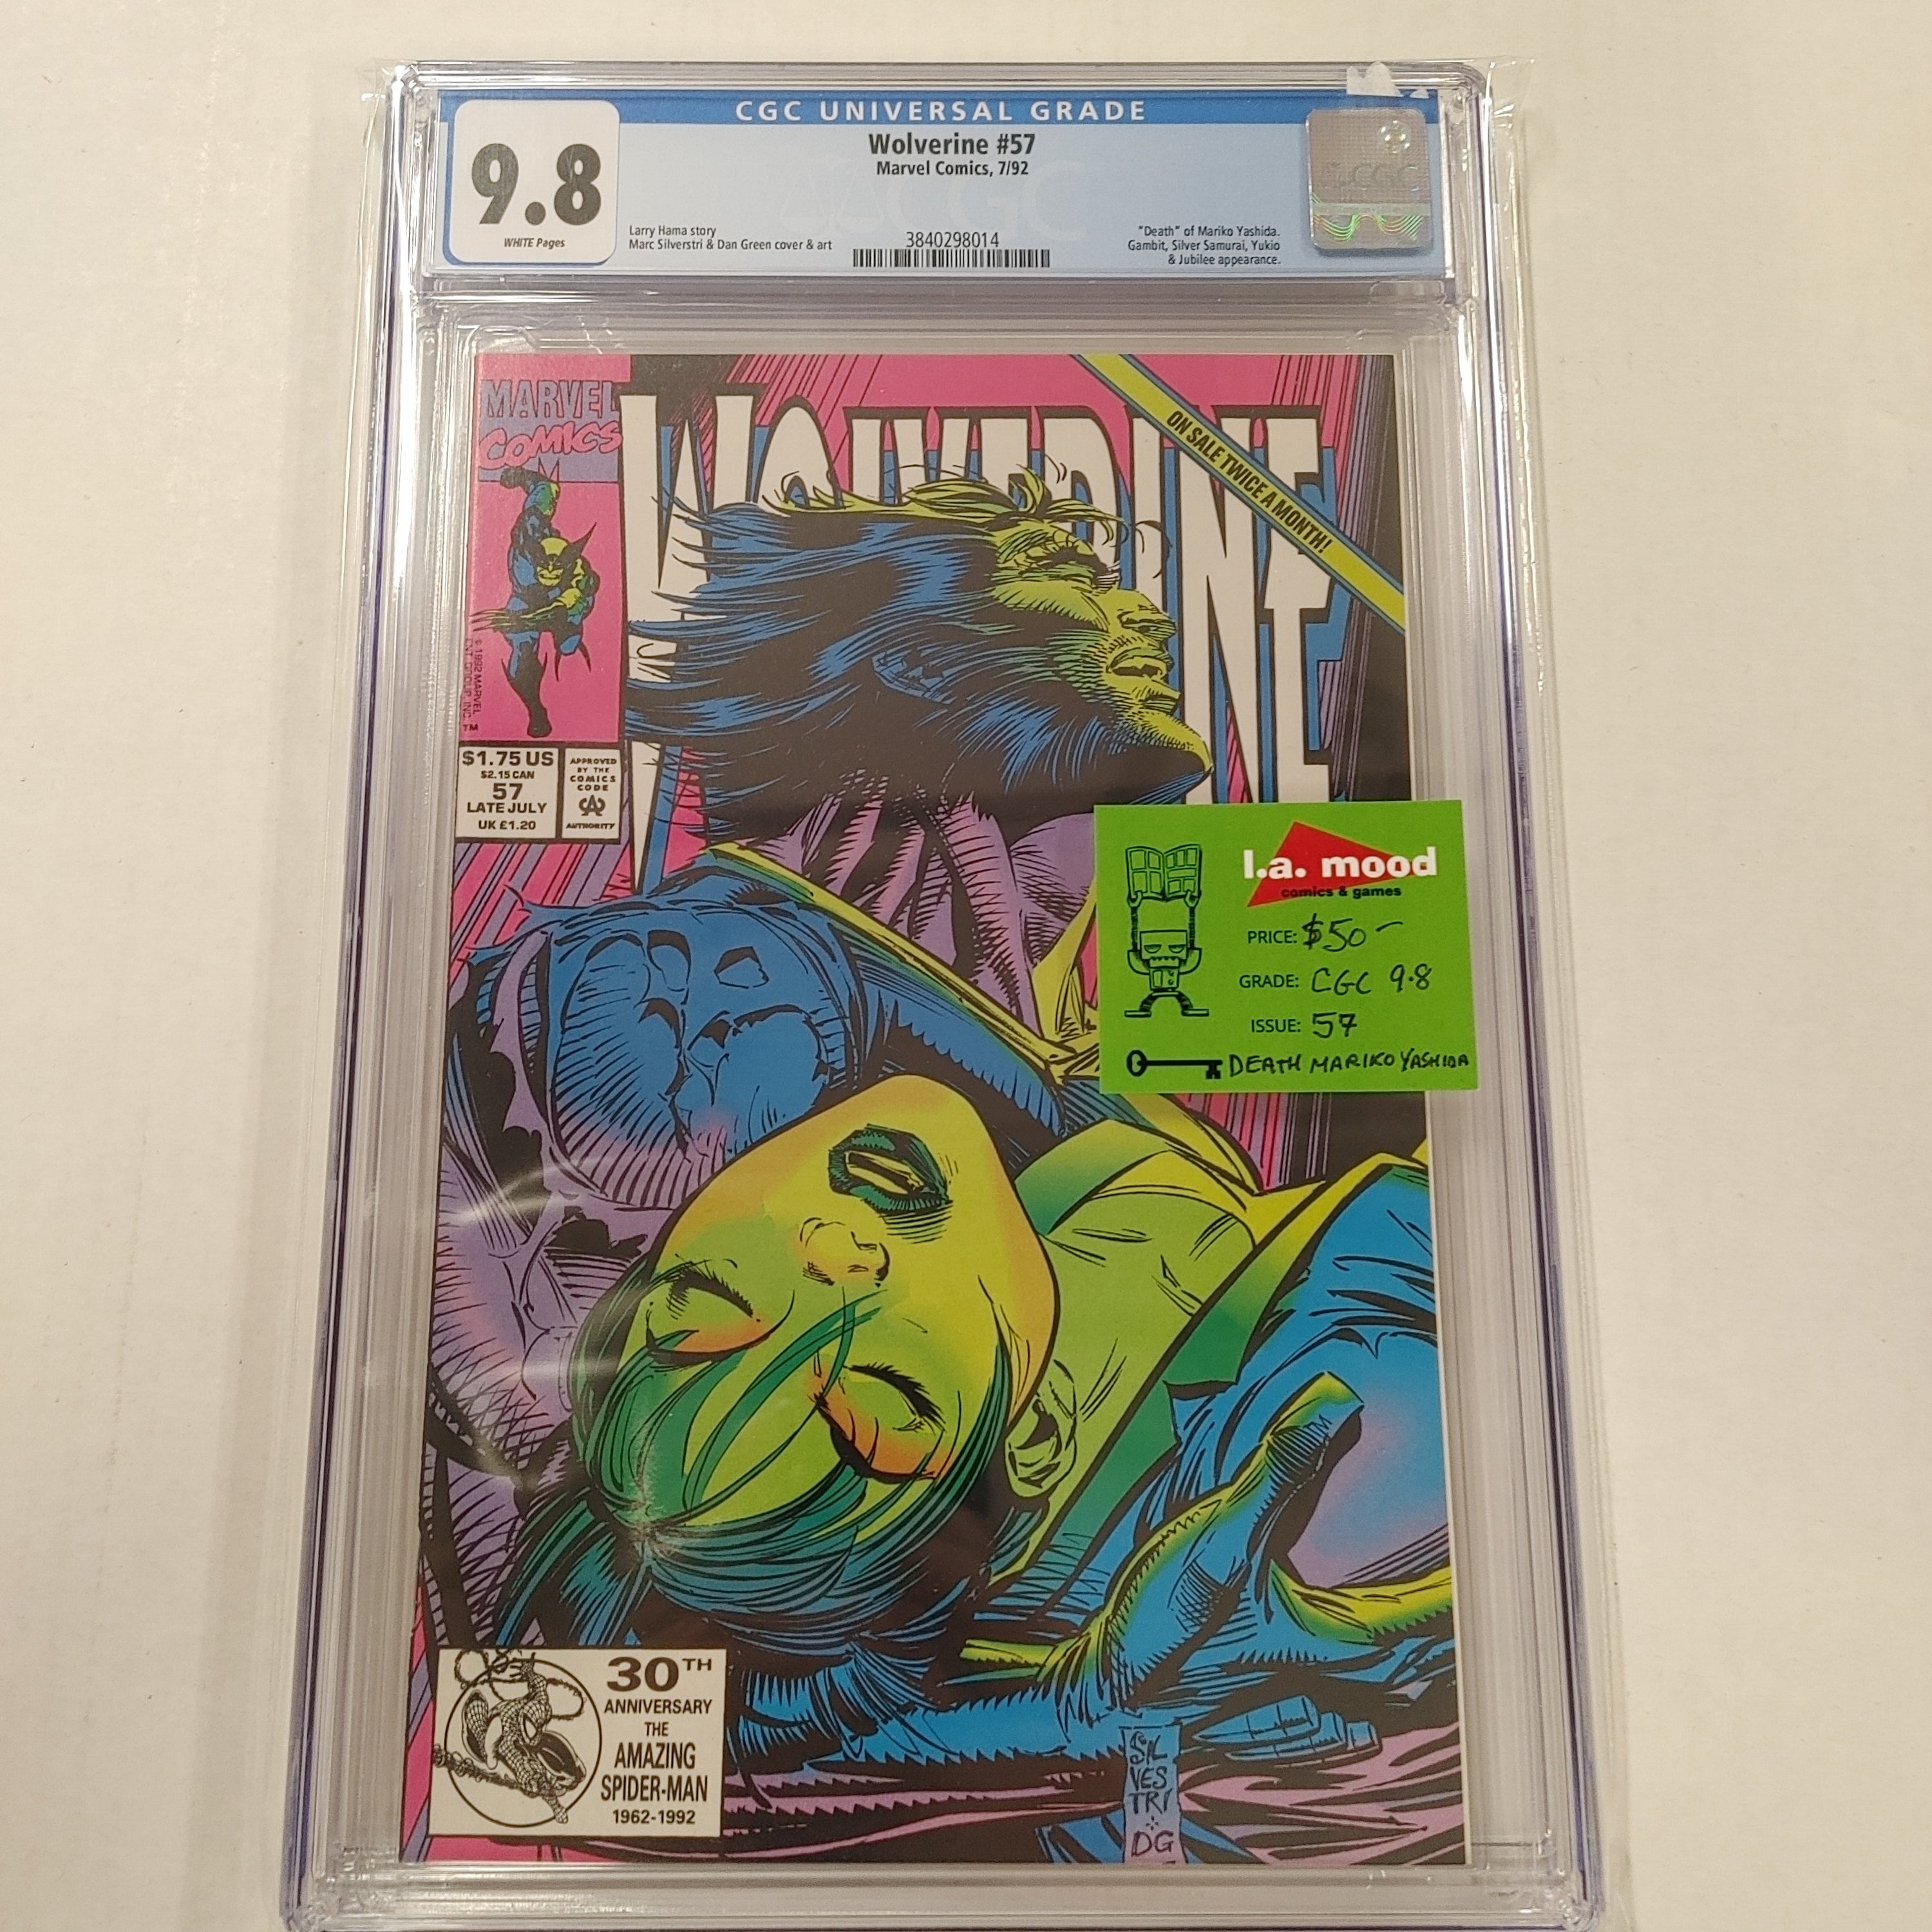 Wolverine #57 CGC 9.8 | L.A. Mood Comics and Games